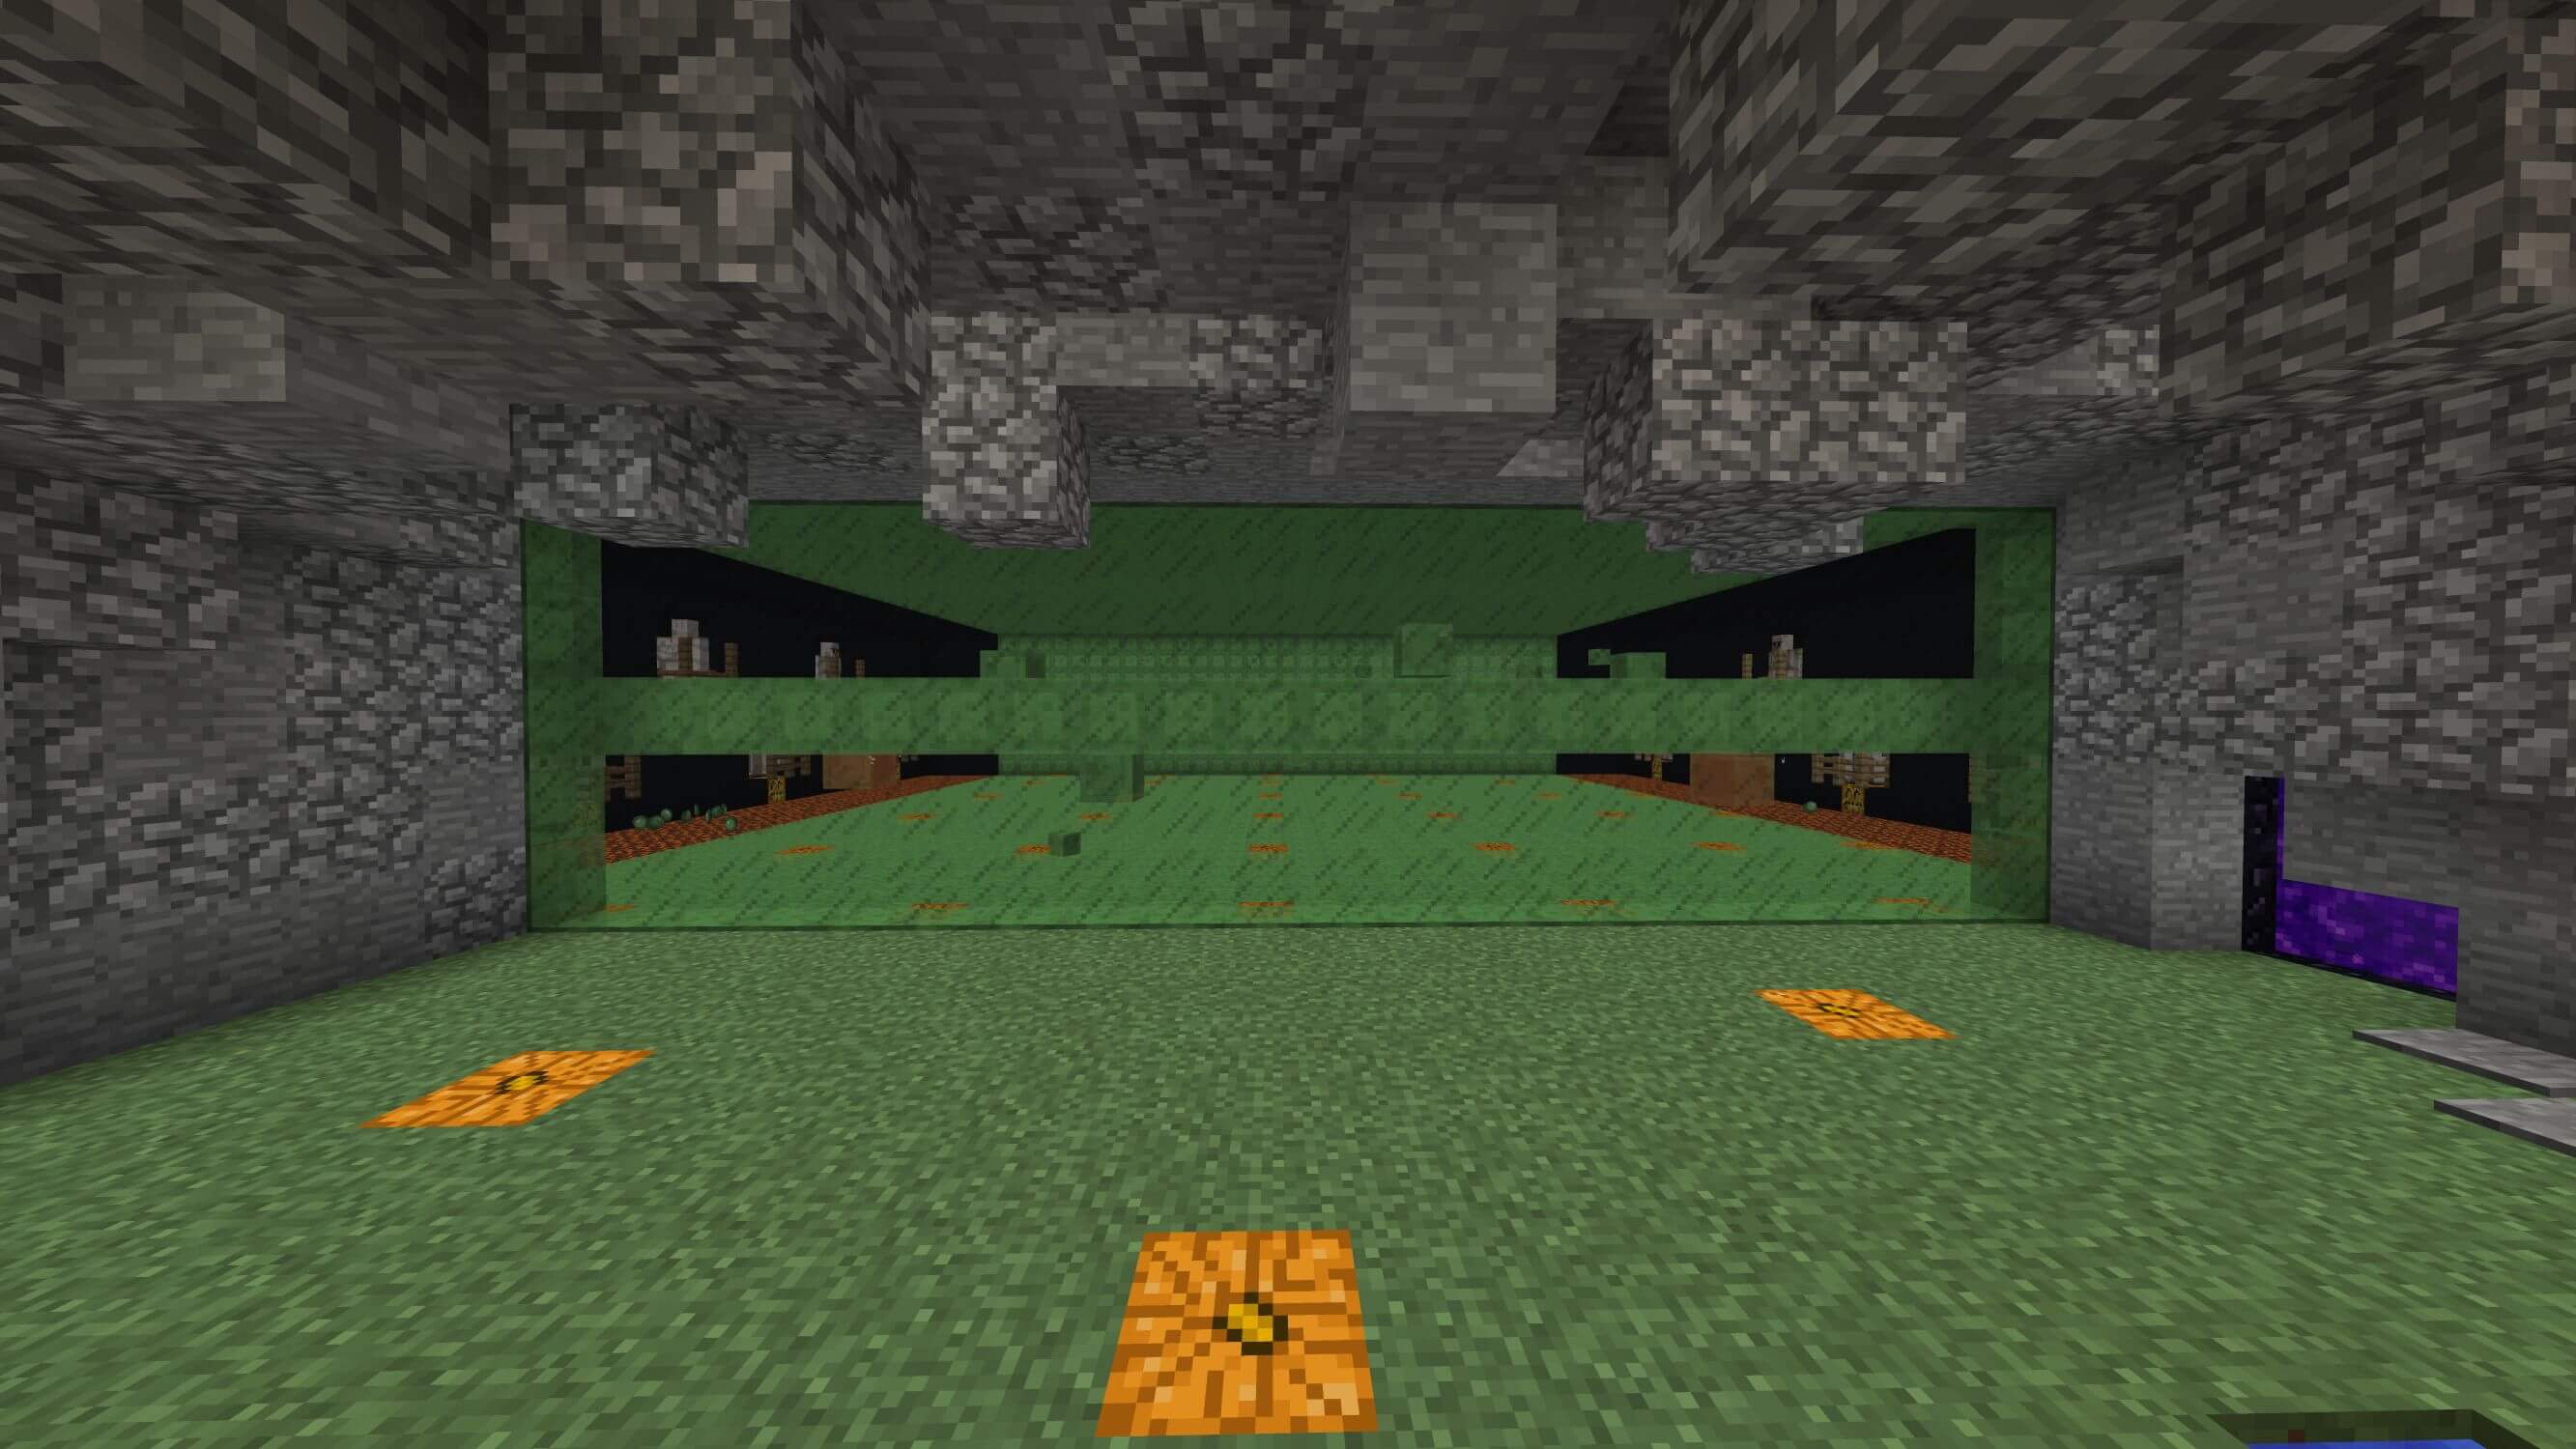 Looking inside a slime farm made of slime blocks with slimes moving towards the edges due to attraction by iron golems